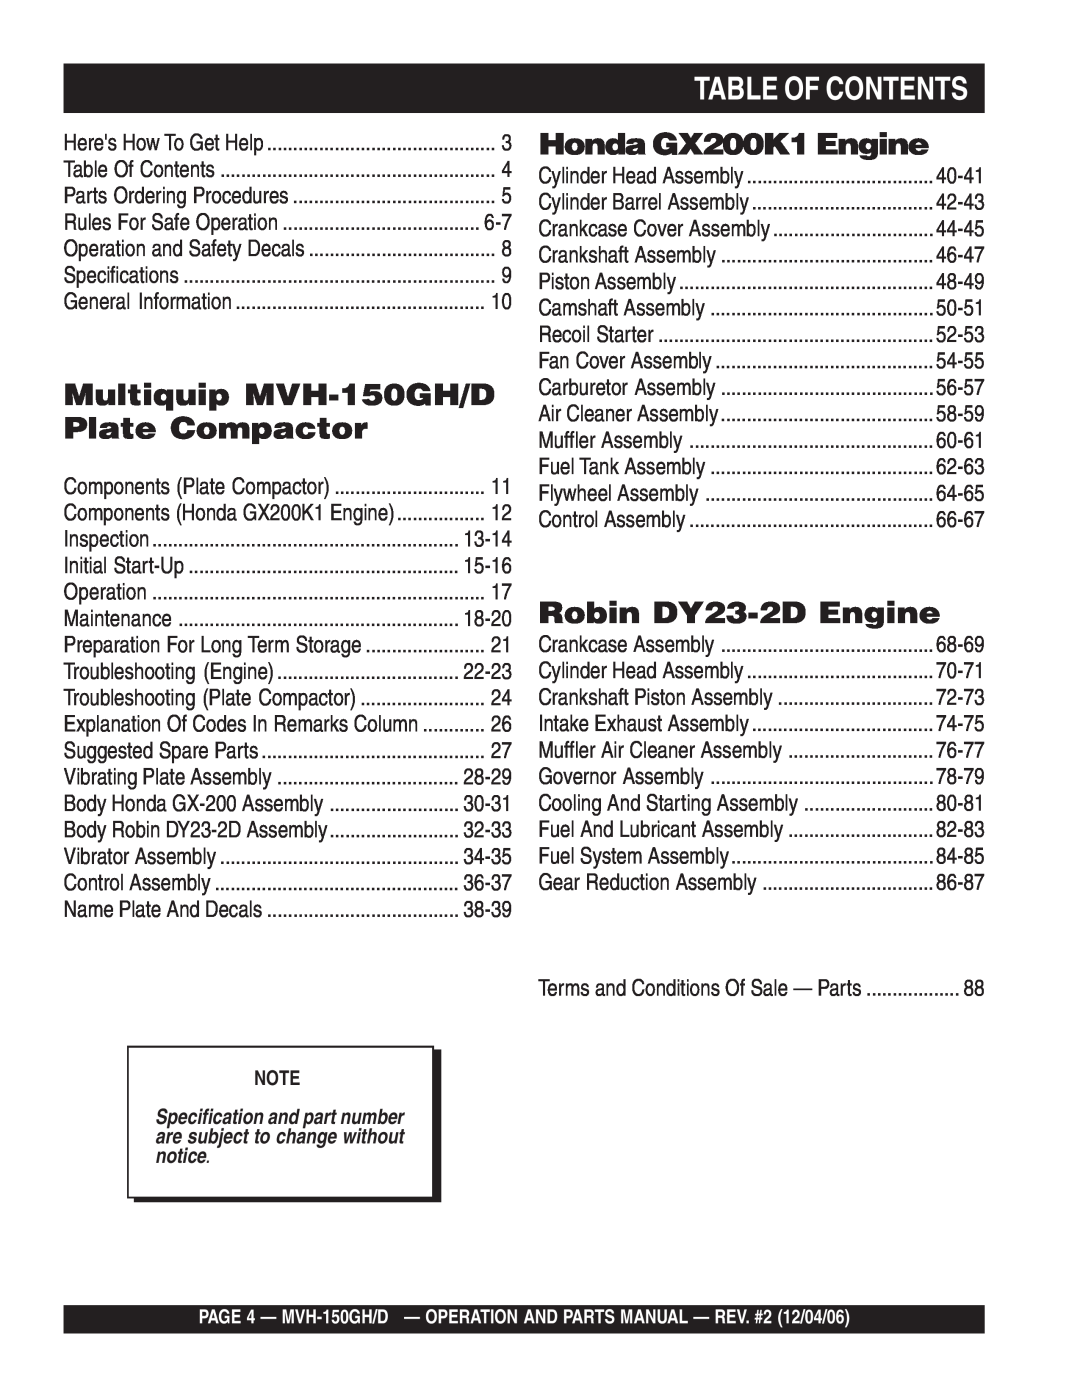 Multiquip manual Table Of Contents, Multiquip MVH-150GH/D Plate Compactor, Honda GX200K1 Engine, Robin DY23-2D Engine 